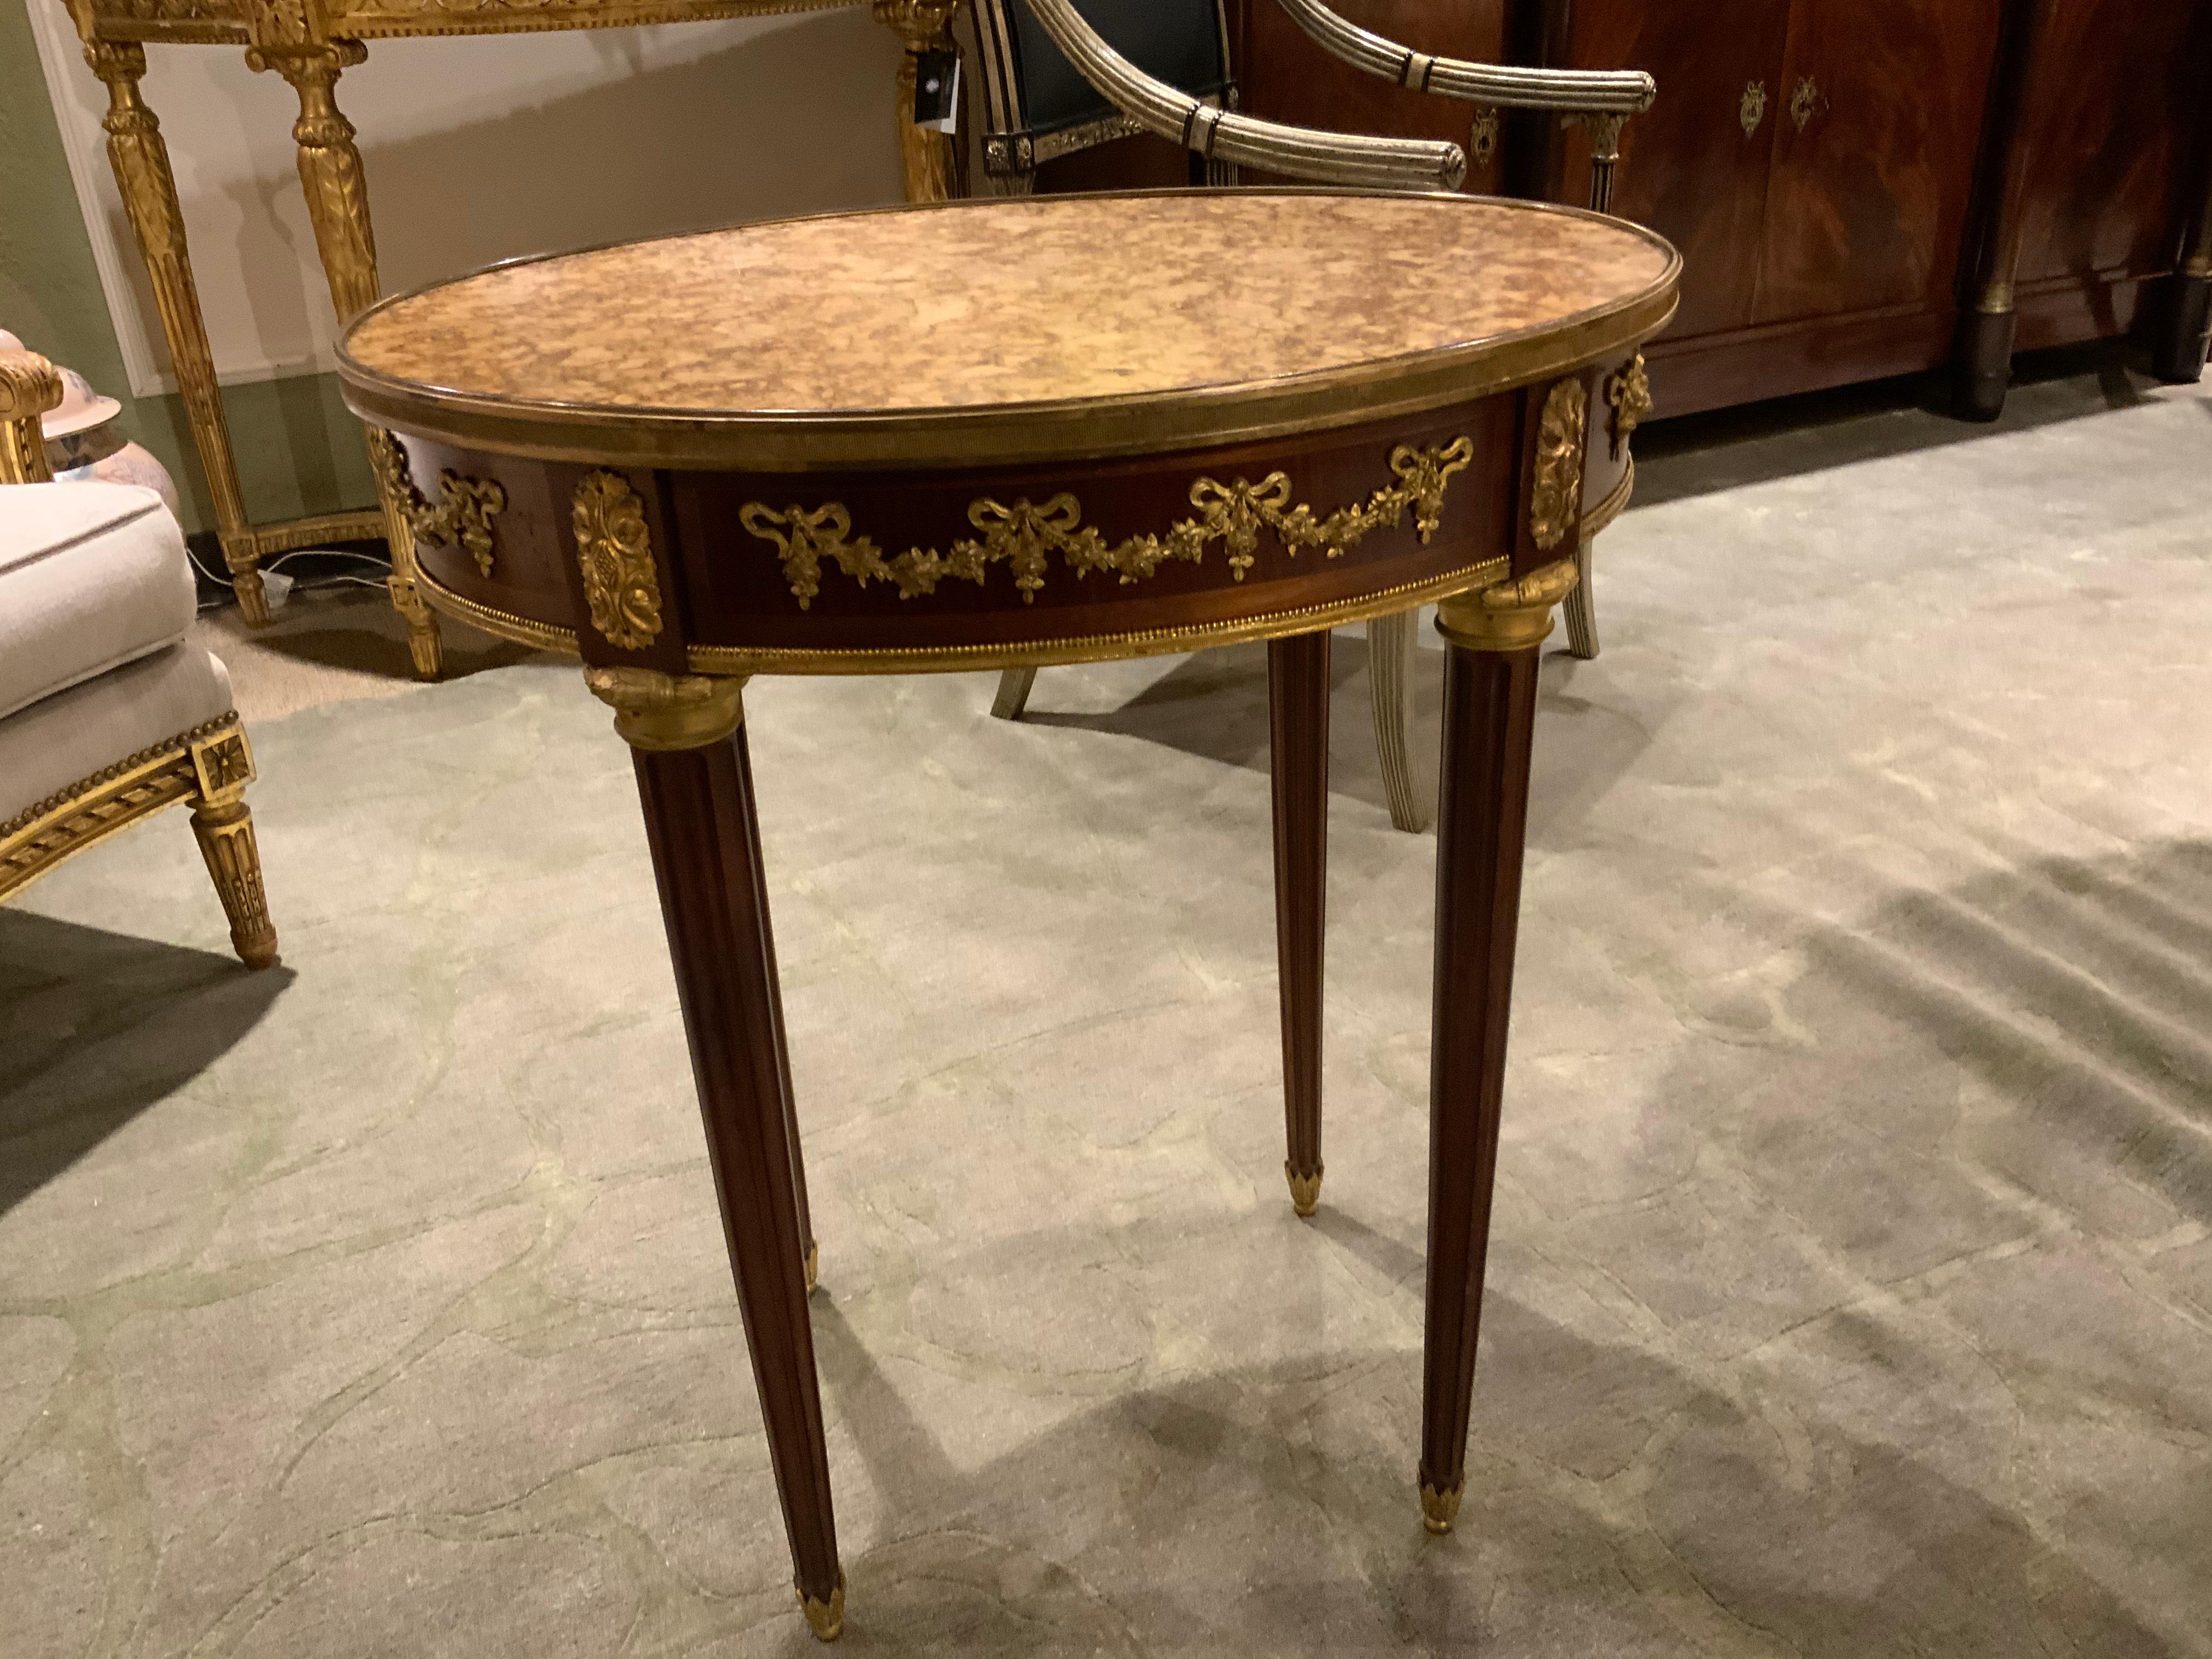 Exquisite oval table with gilt bronze swags depicting bows and floral swags. Having a gold mingled
Marble inset at the top, rimmed in gilt bronze. Reeded legs ending in sabots.